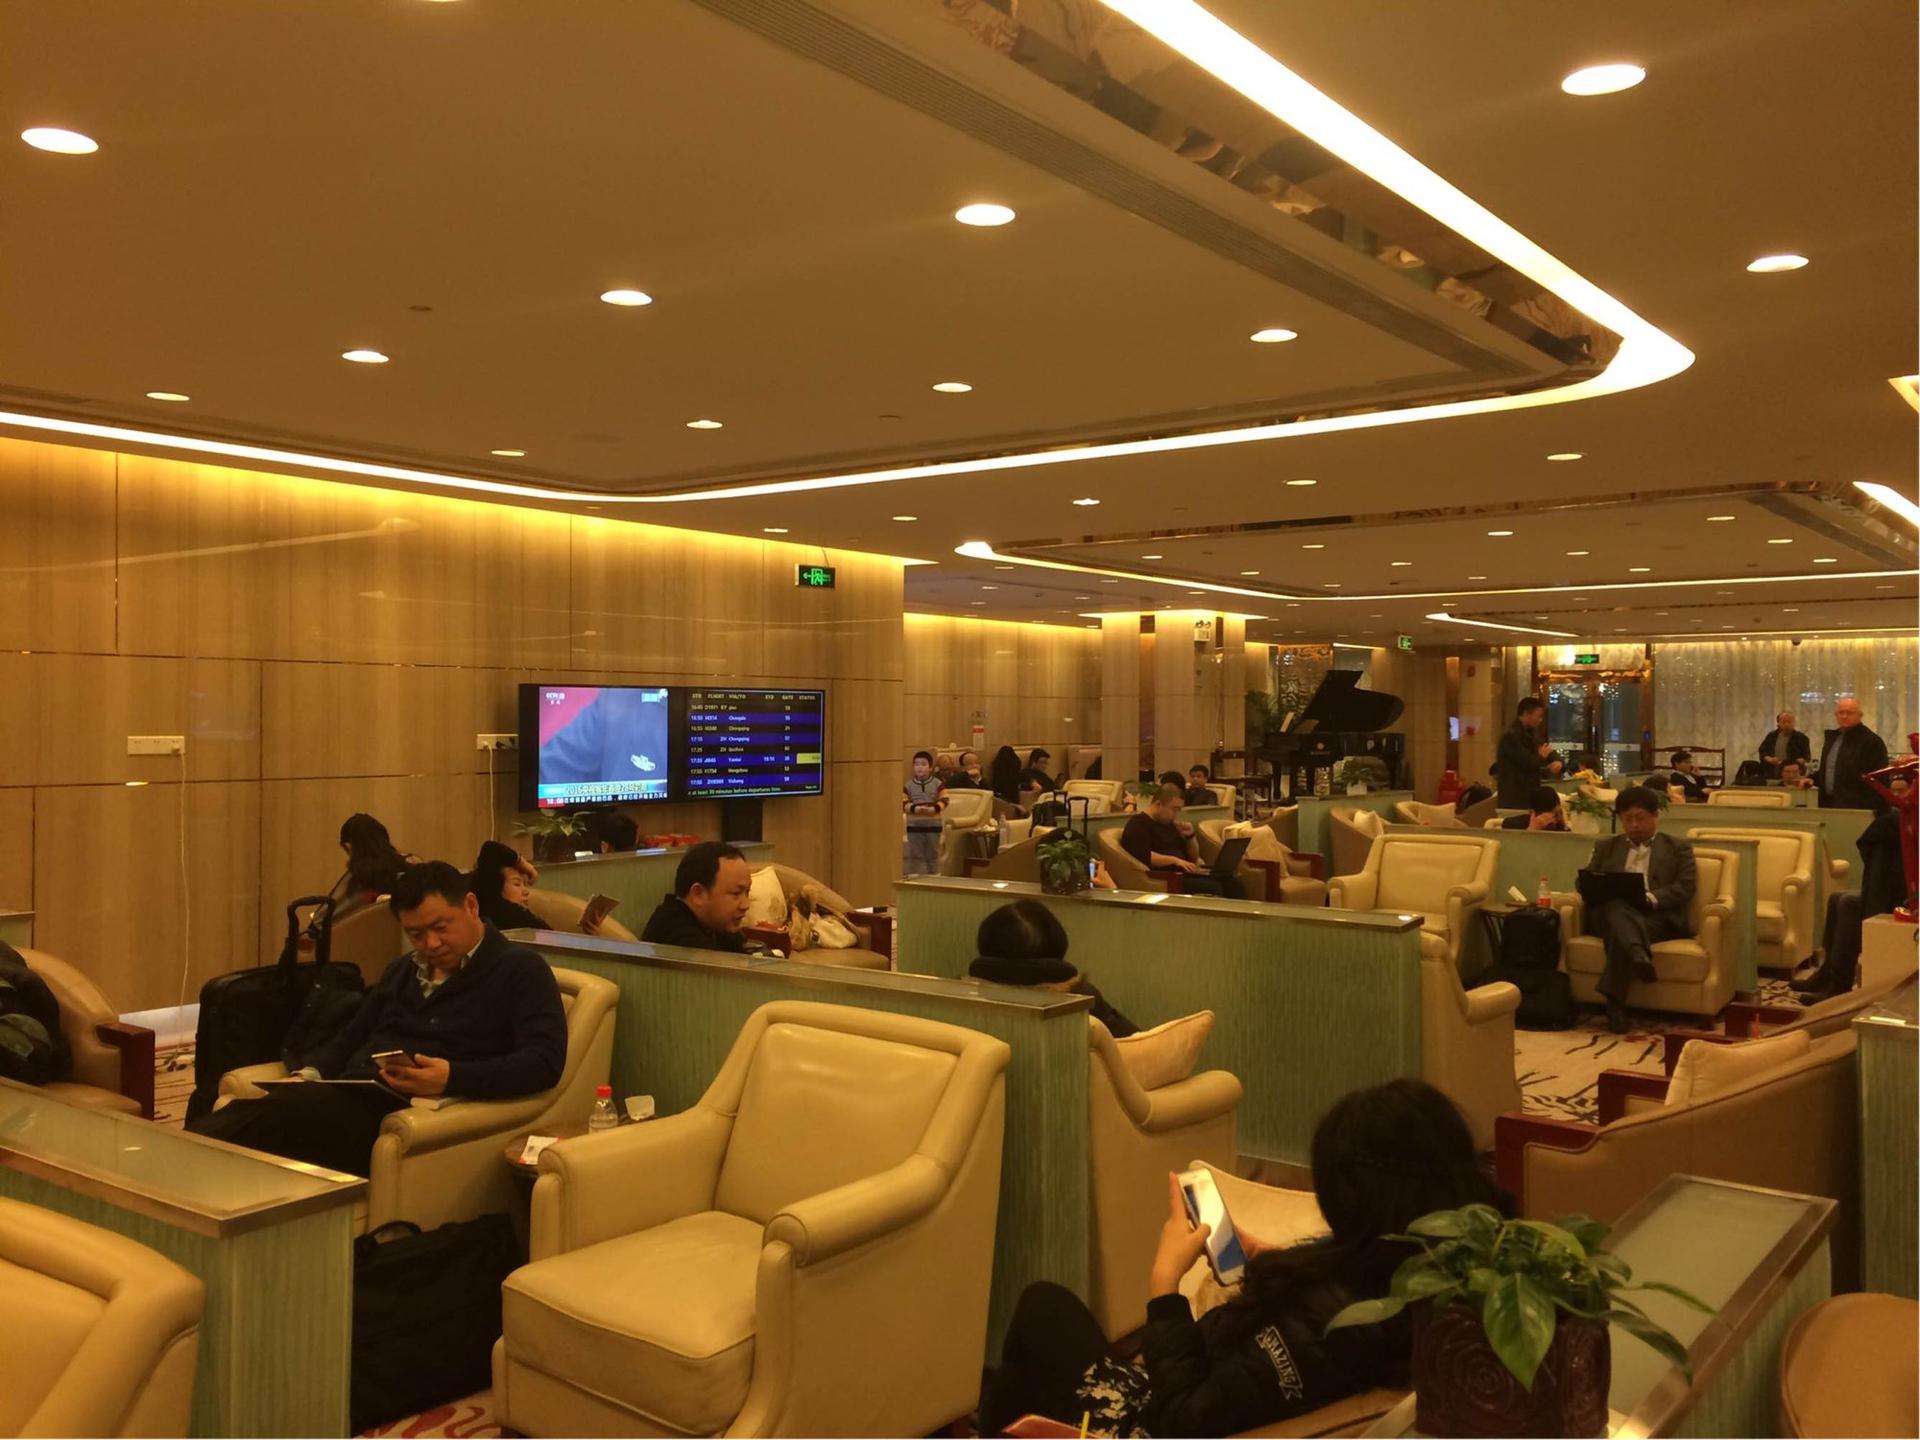 Shenzhen Airlines King Lounge Hall 2 image 6 of 7